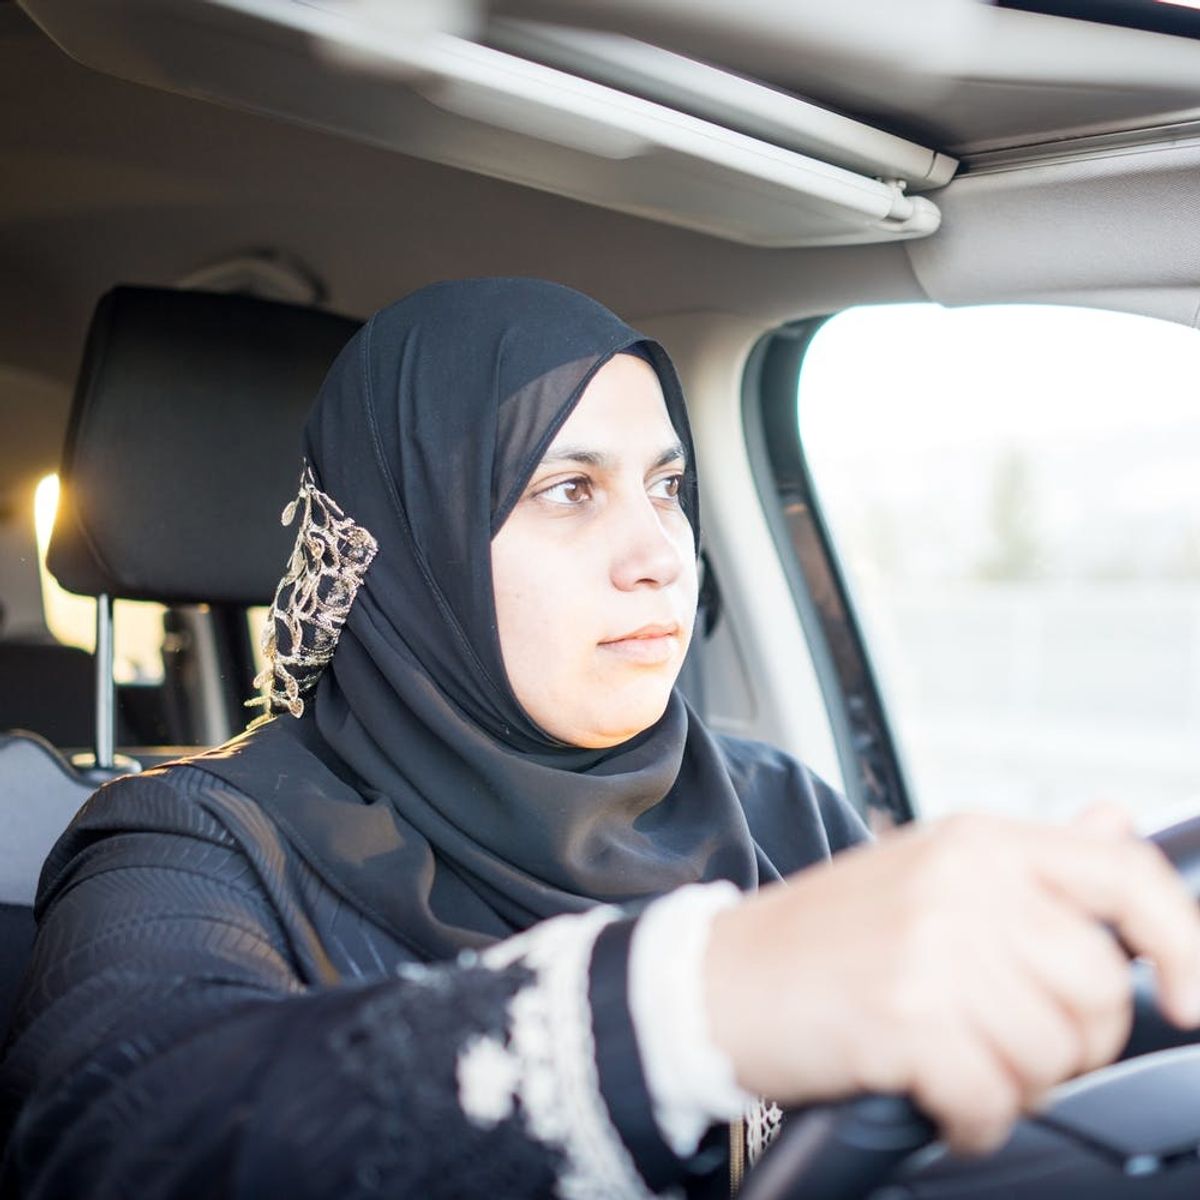 Women in Saudi Arabia Can Now Drive for the 1st Time in Over 60 Years — But It’s a Mixed Blessing